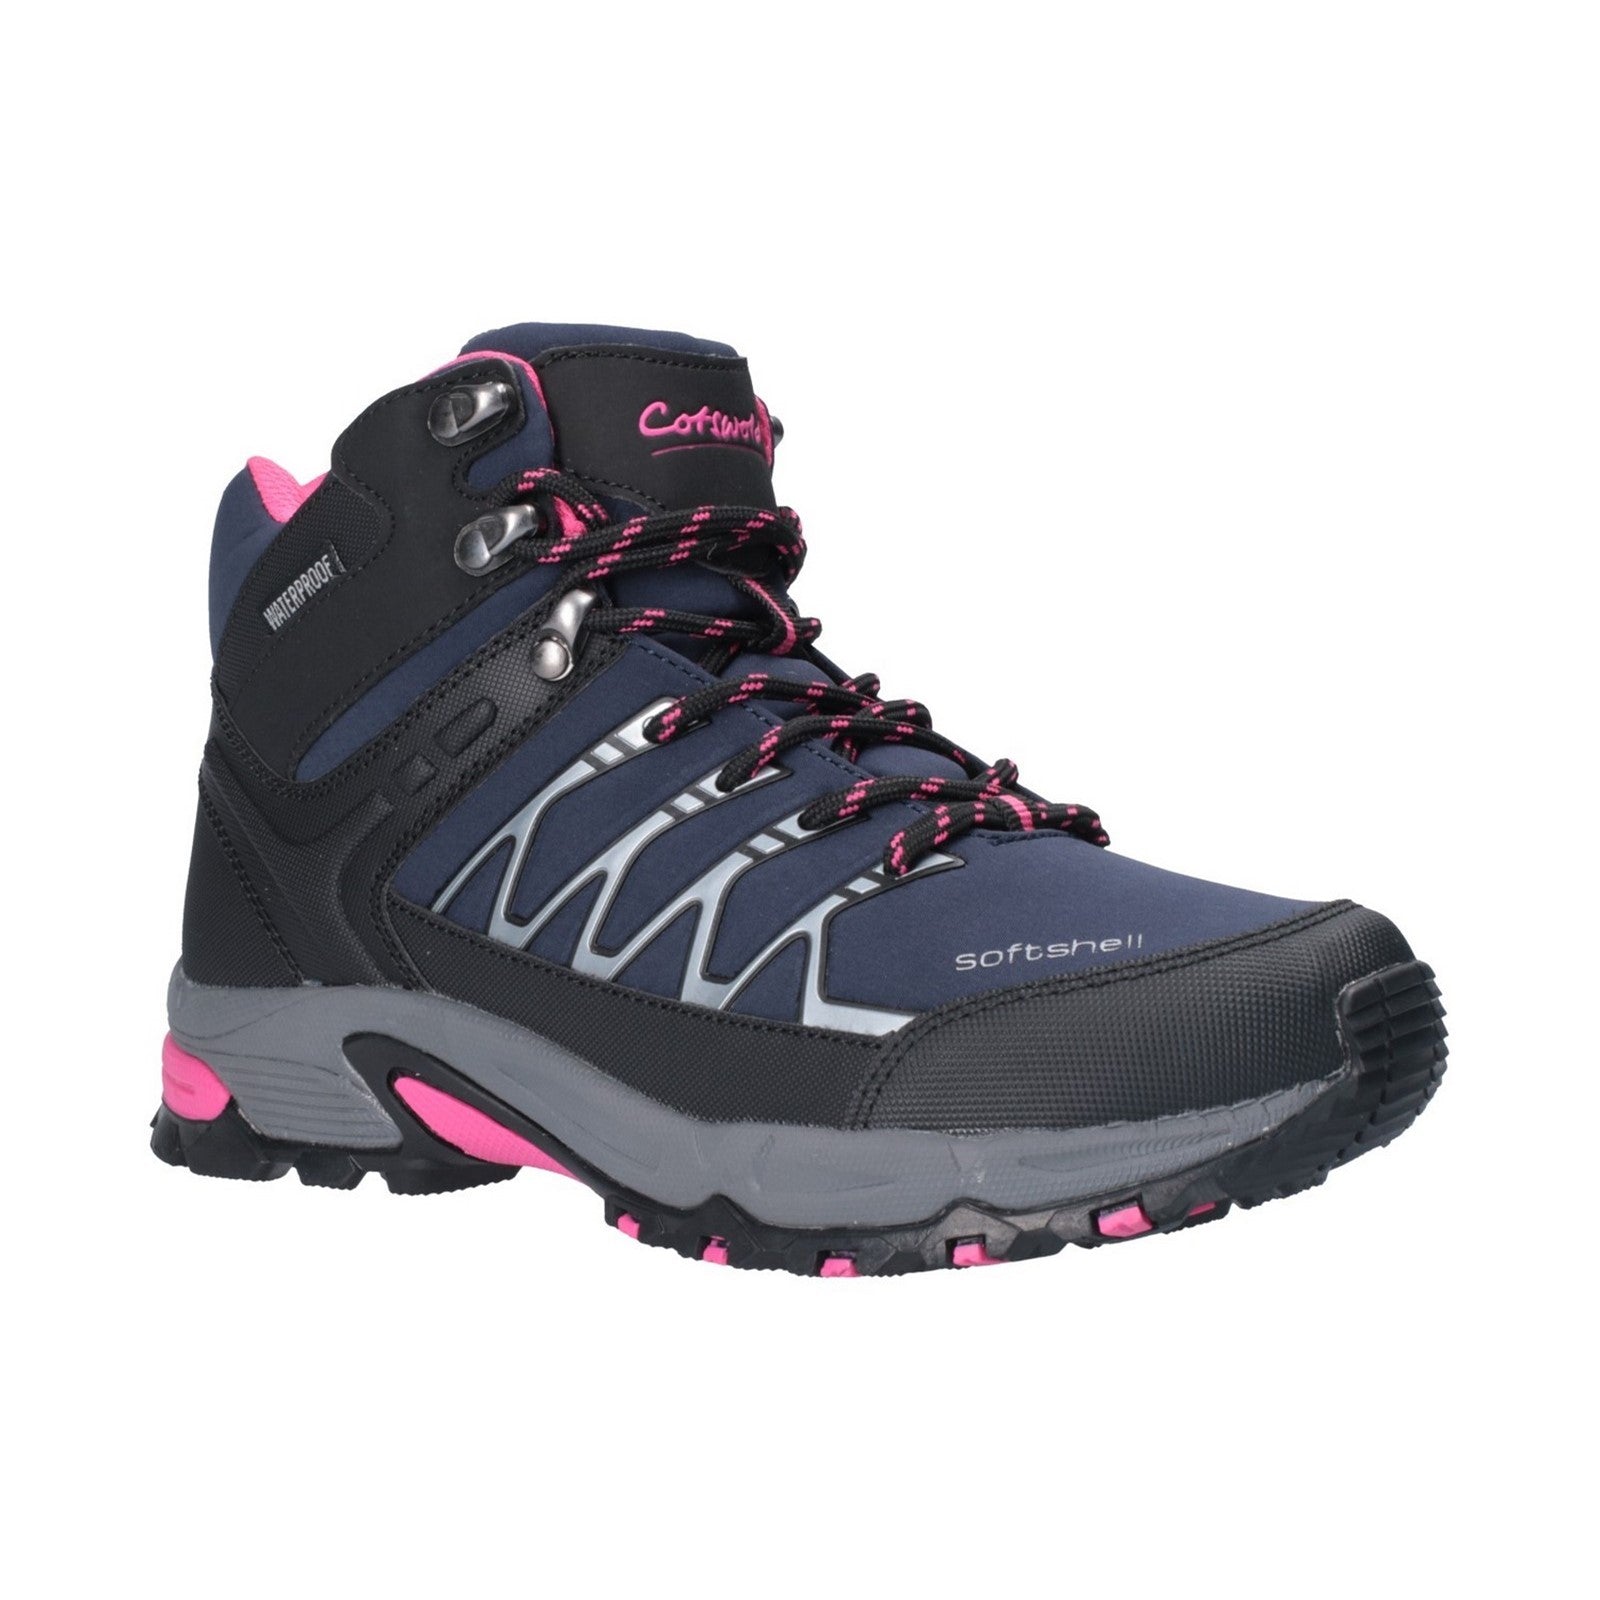 Cotswold Abbeydale Mid Hiker Boots